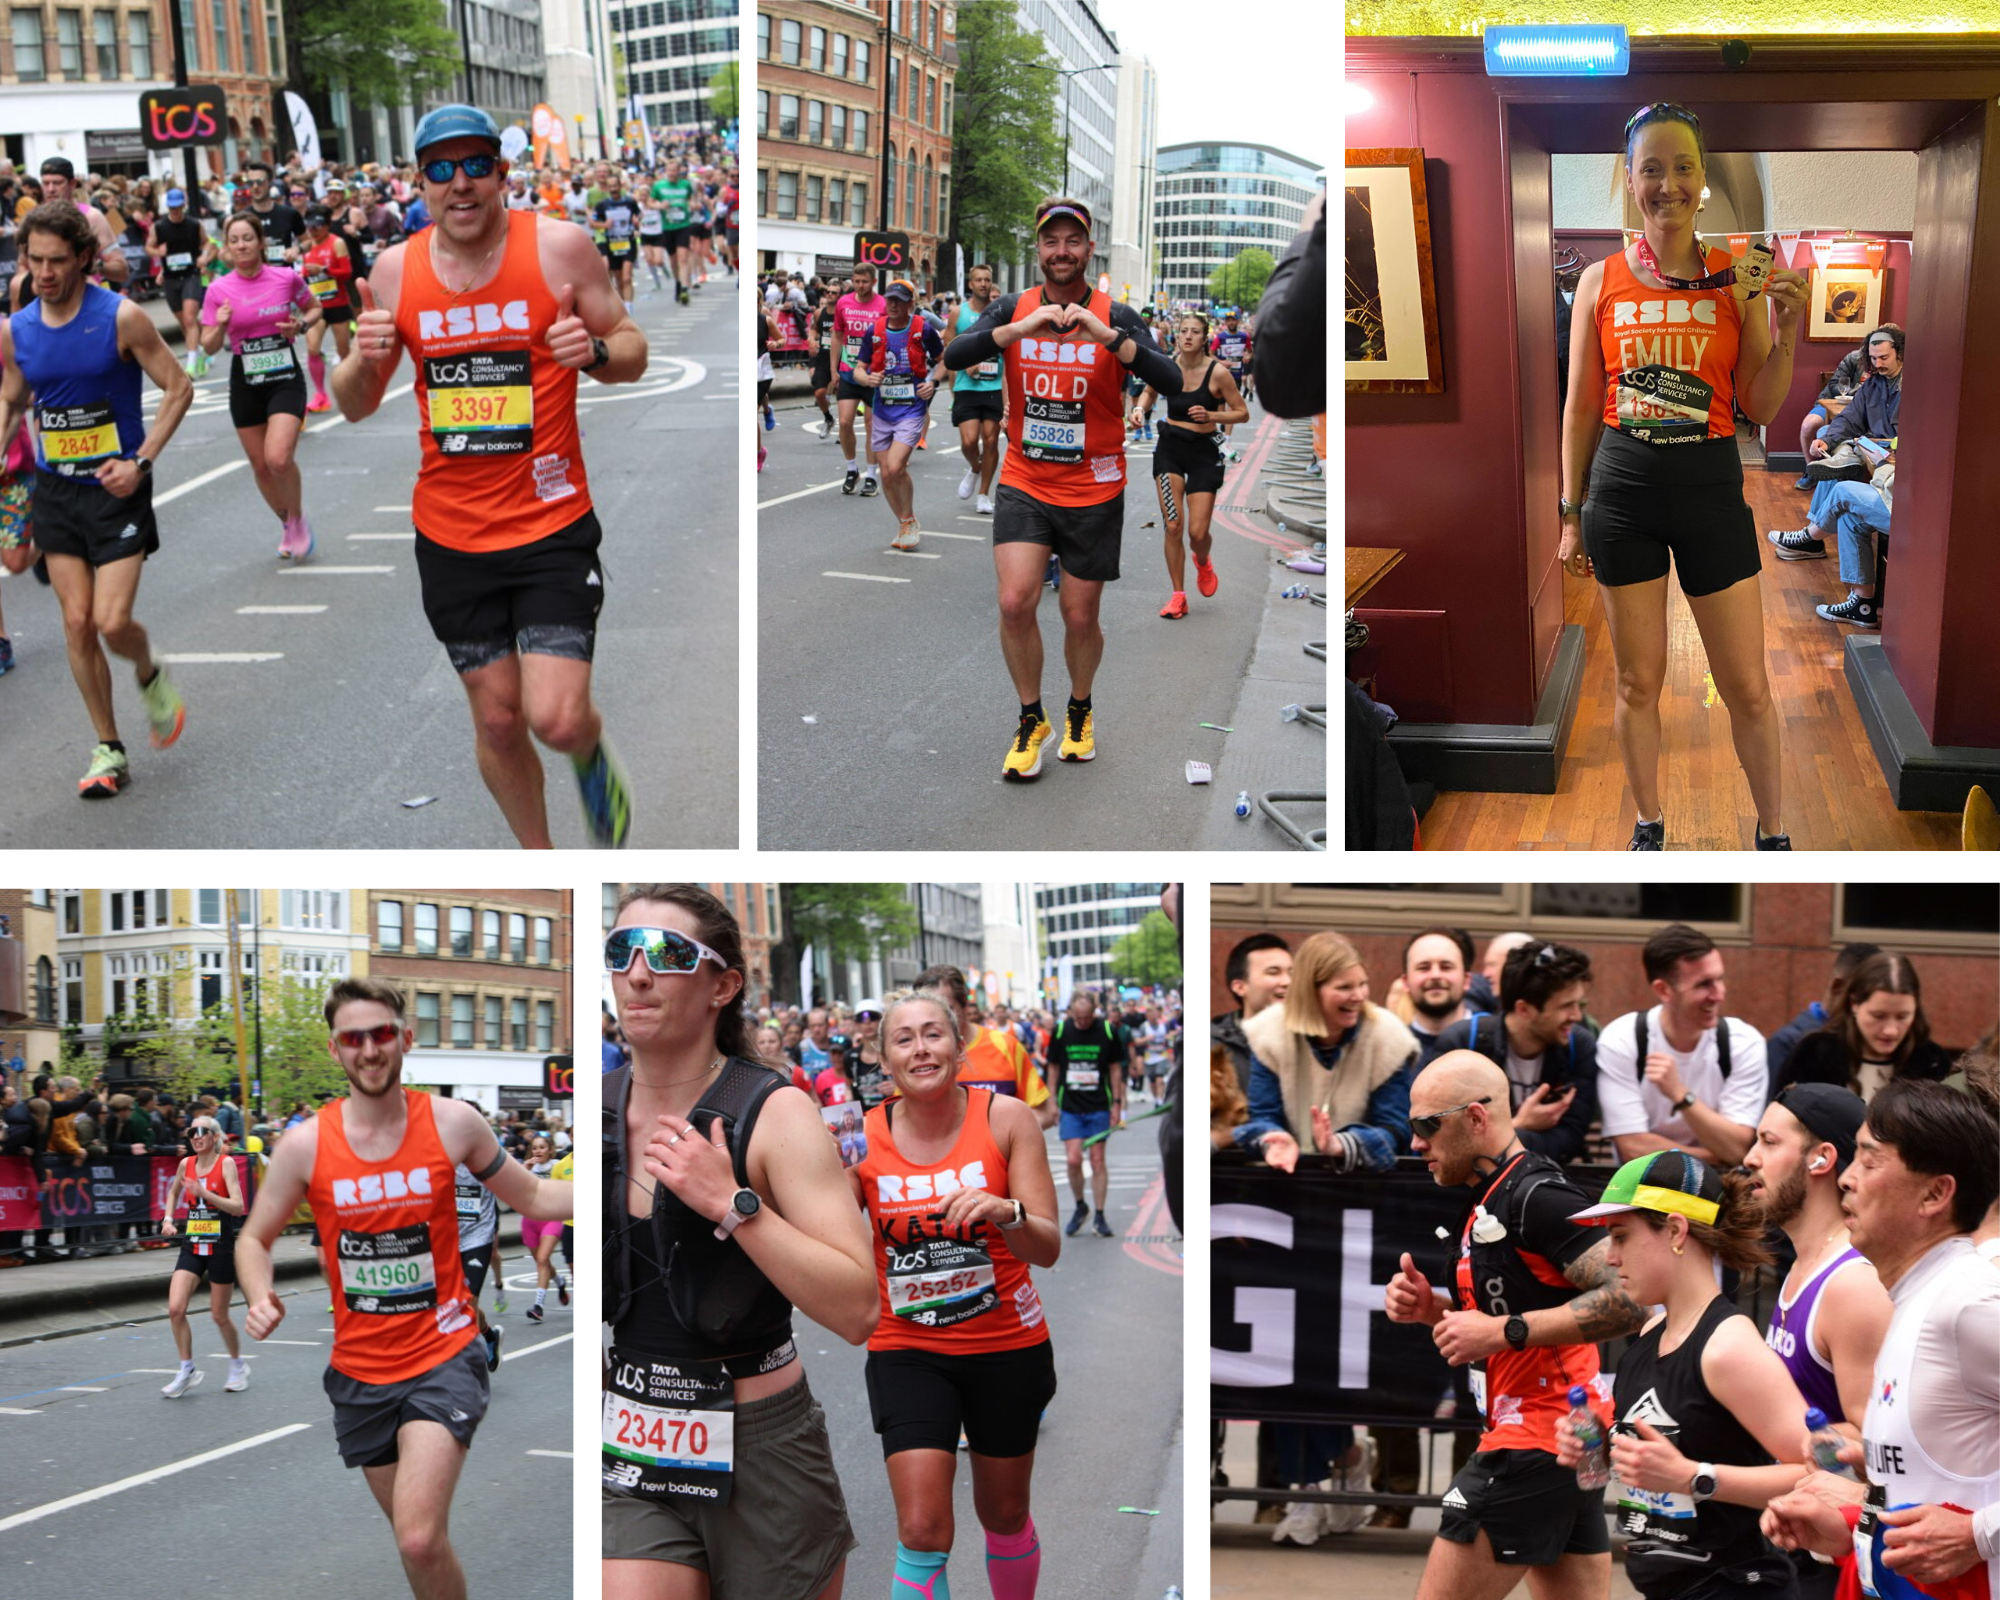 A photo album of 6 images from the London Marathon. Runners on the street of London - some signalling to the crowd, and 1 female runner posing with her medal after the race.